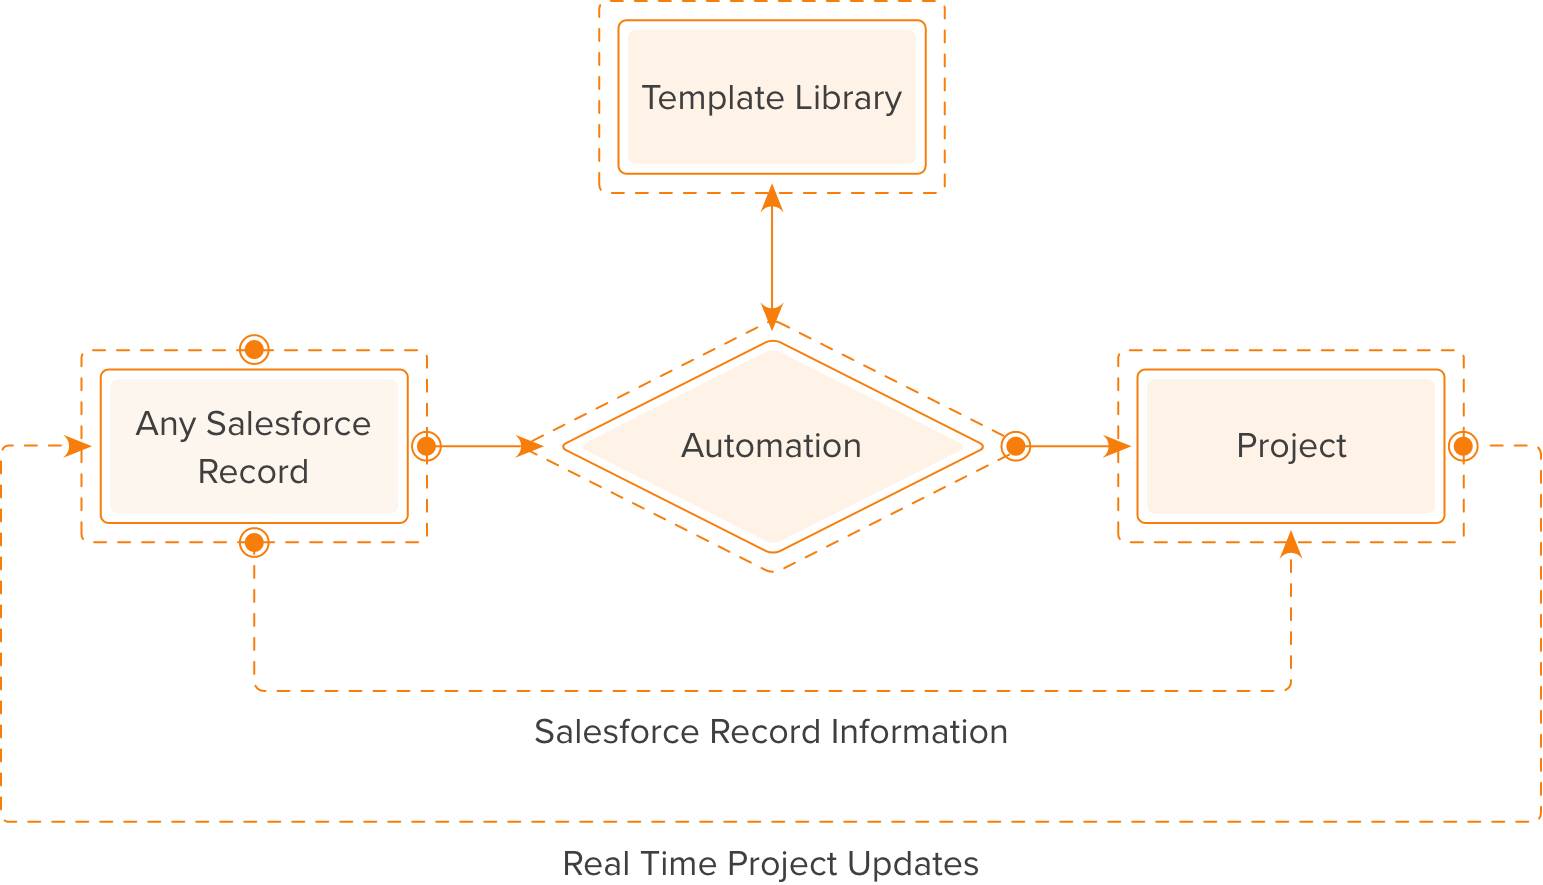 Turn any Salesforce Record into a Project